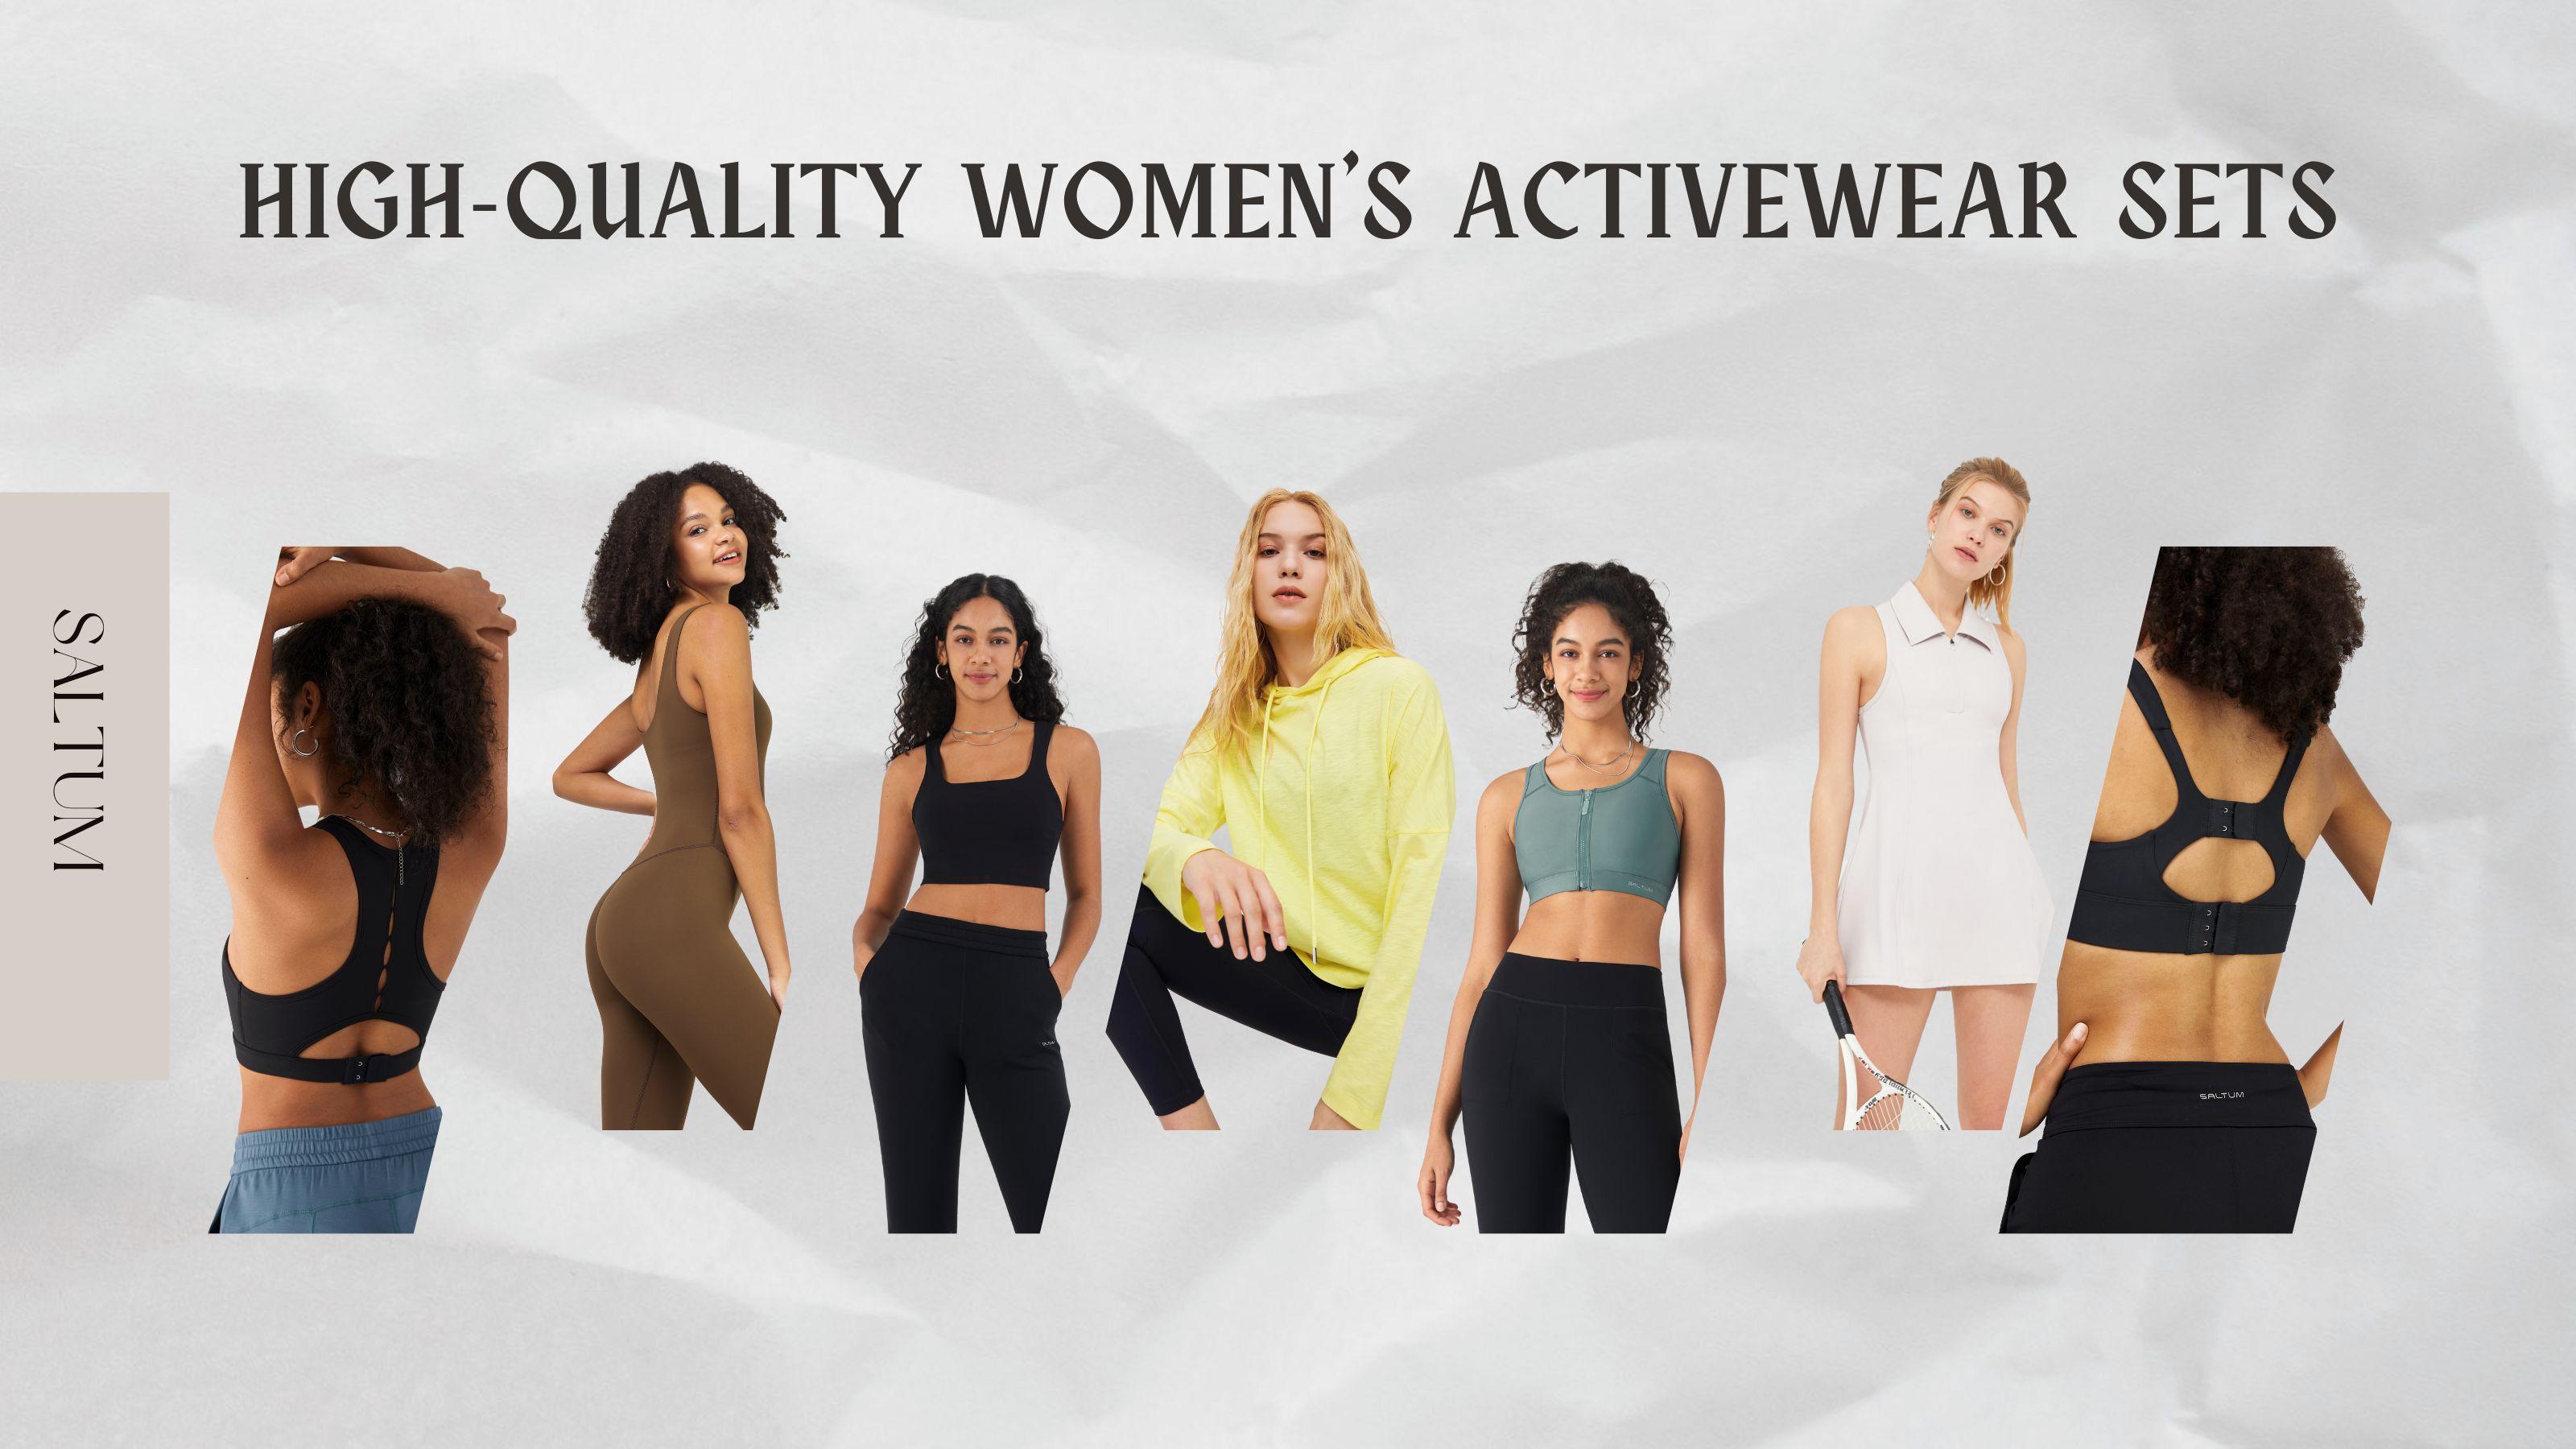 High Quality Women's Activewear Sets and Yoga Sets for Women